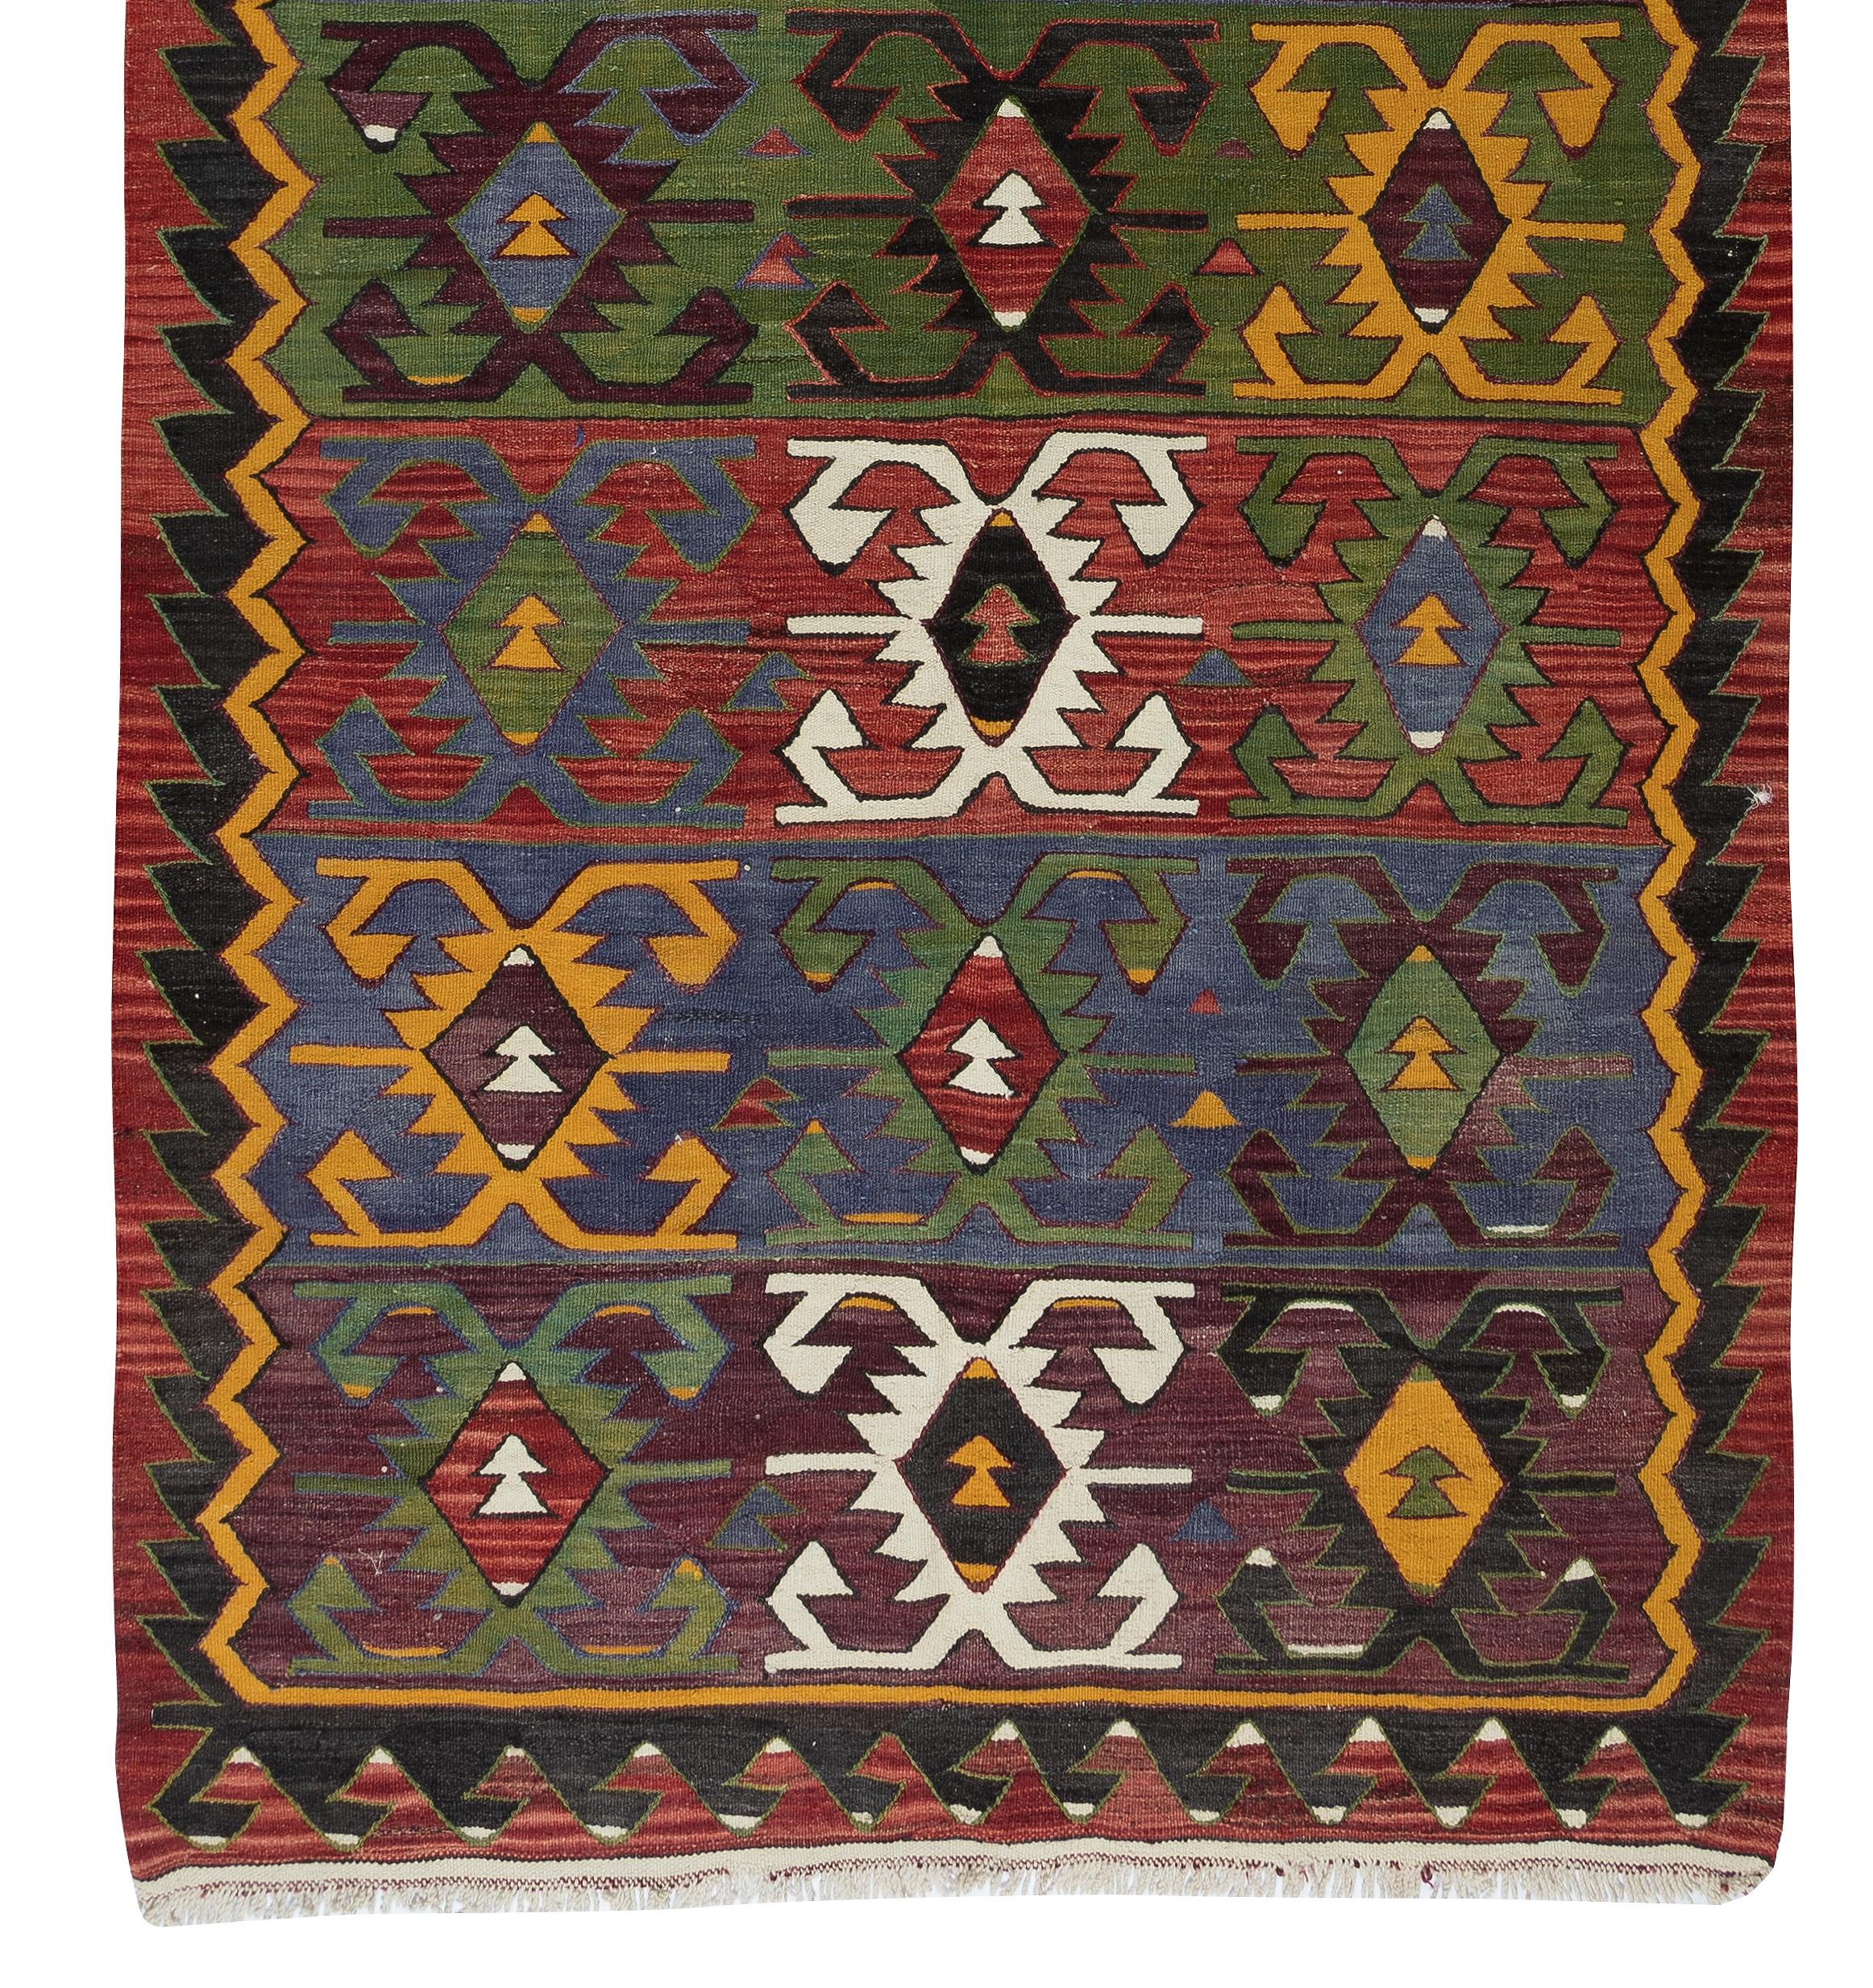 20th Century 5.3x11.5 Ft Colorful Vintage Hand-Woven Anatolian Kilim, Flat-Weave Runner Rug For Sale